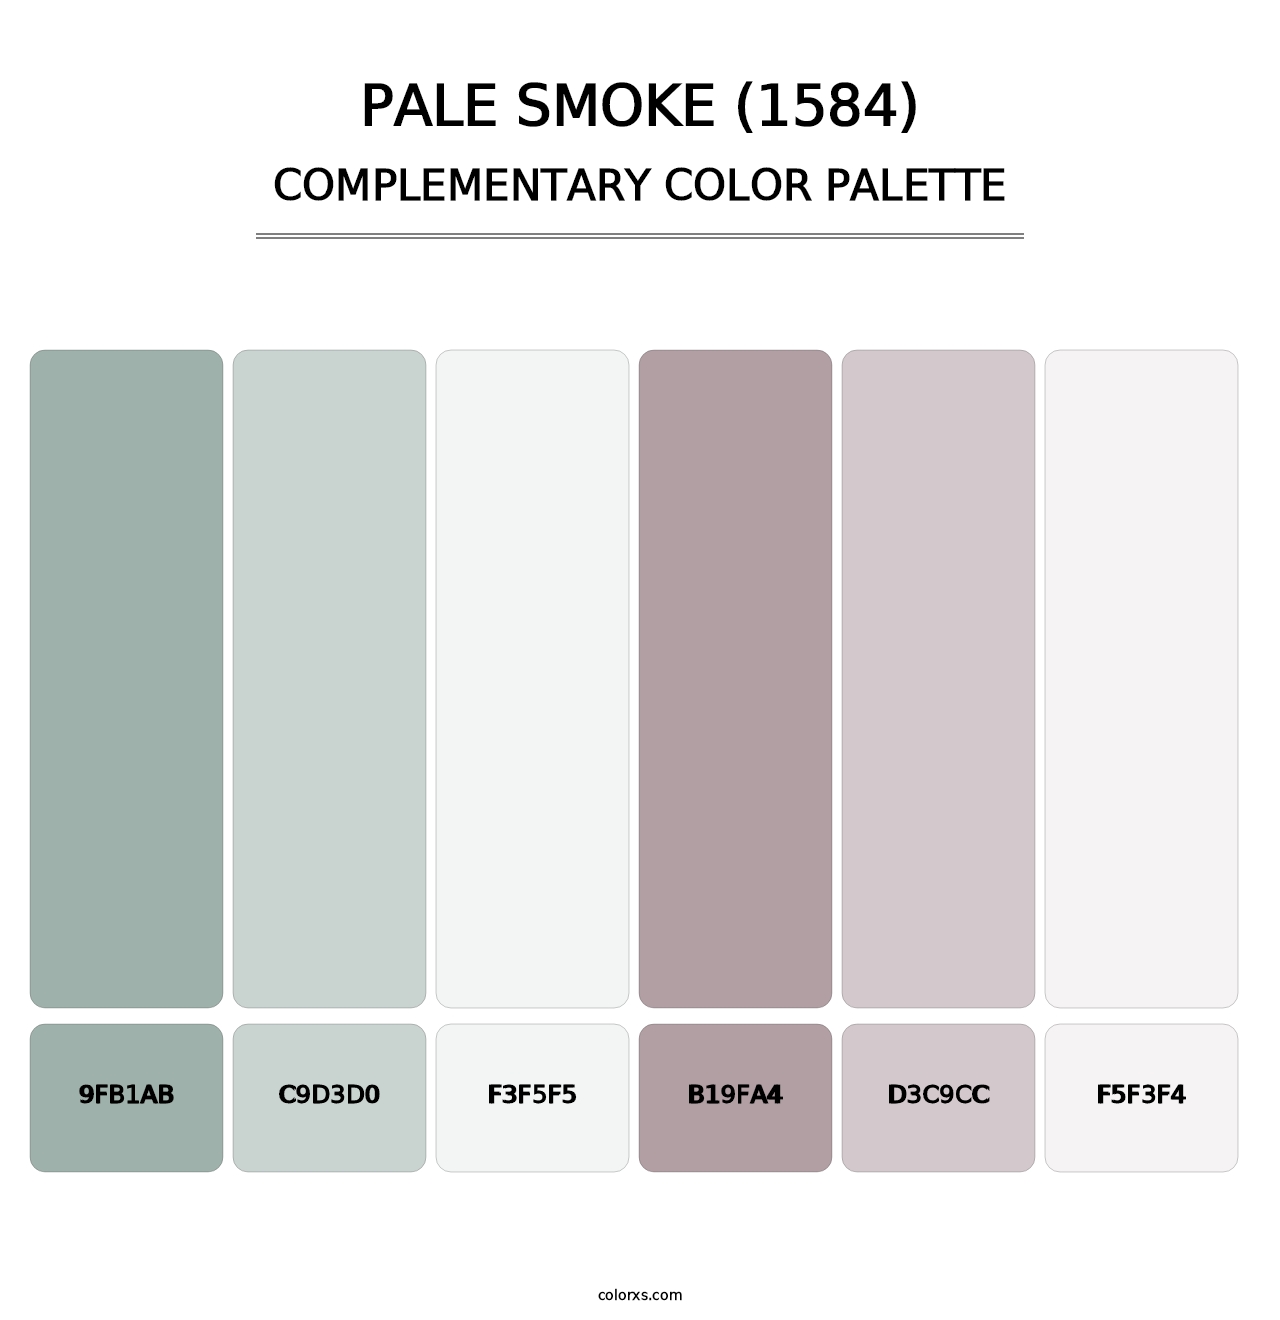 Pale Smoke (1584) - Complementary Color Palette